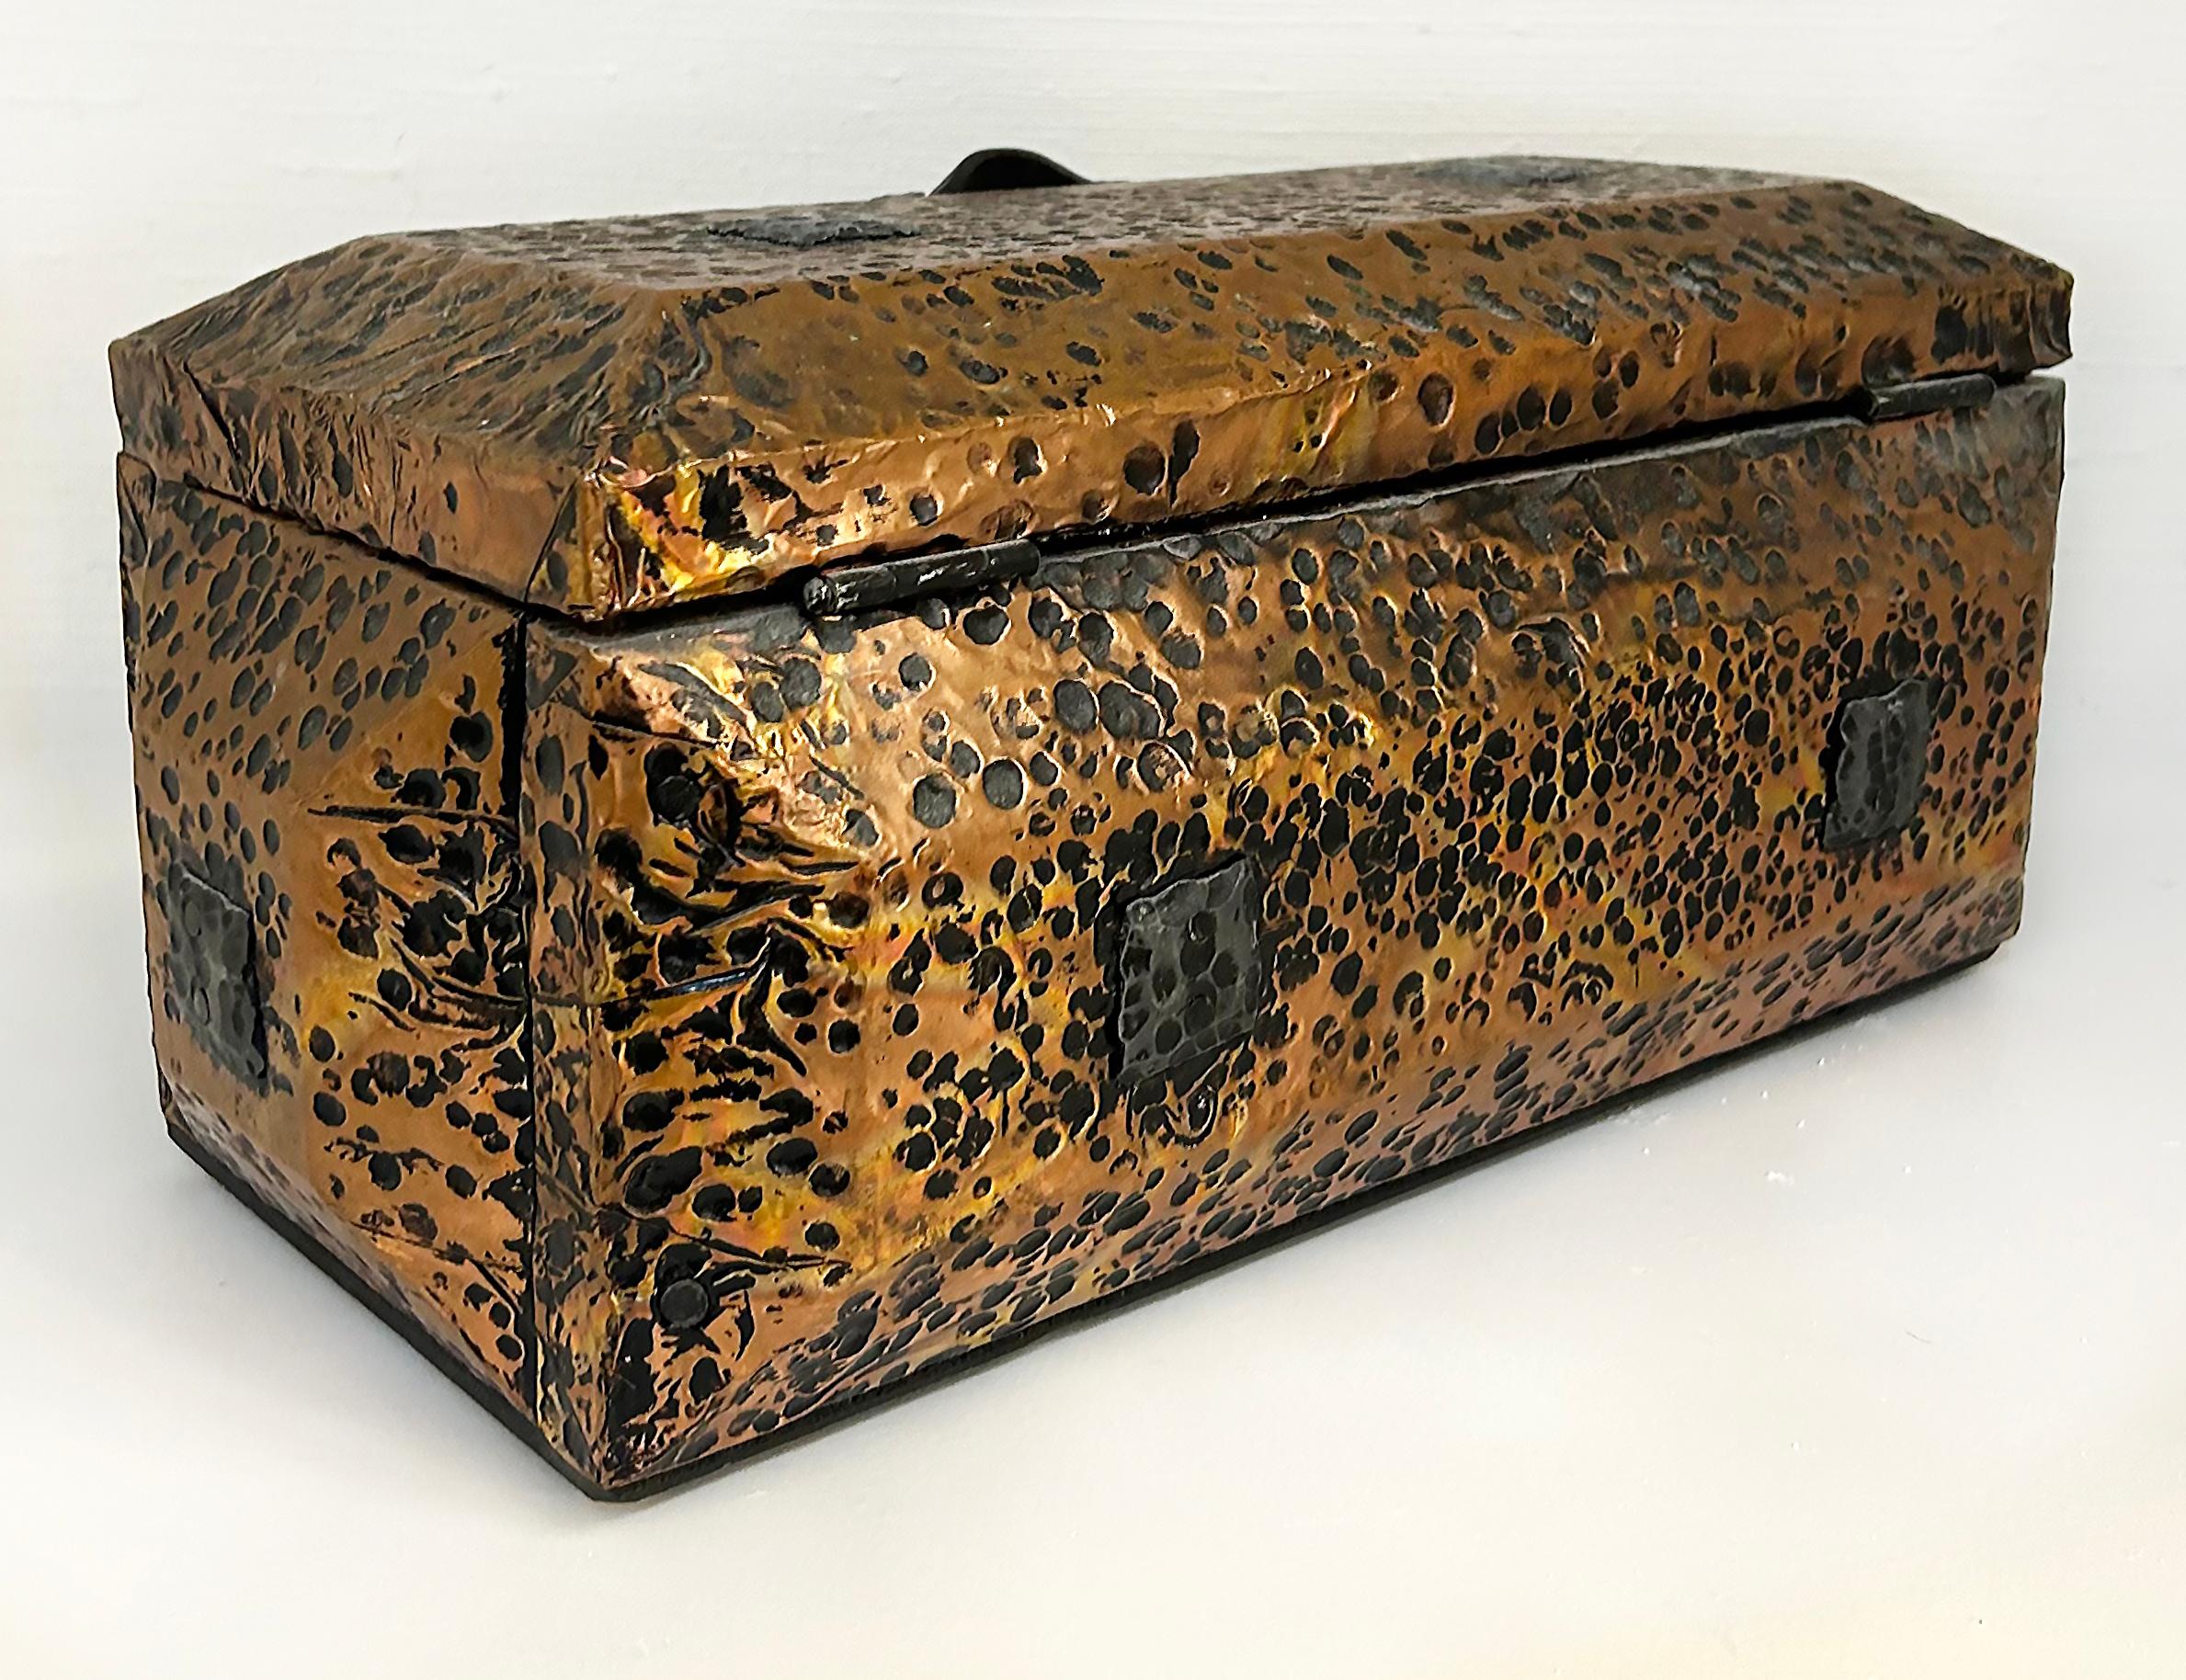 Vintage Arenson Studios “Infinity” Brutalist Hammered Box, Brass, Copper, Leather

Offered for sale is an Arenson Studios of West Palm Beach Brutalist hammered copper, brass, and leather coffered box.  This is a recent acquisition from a Key